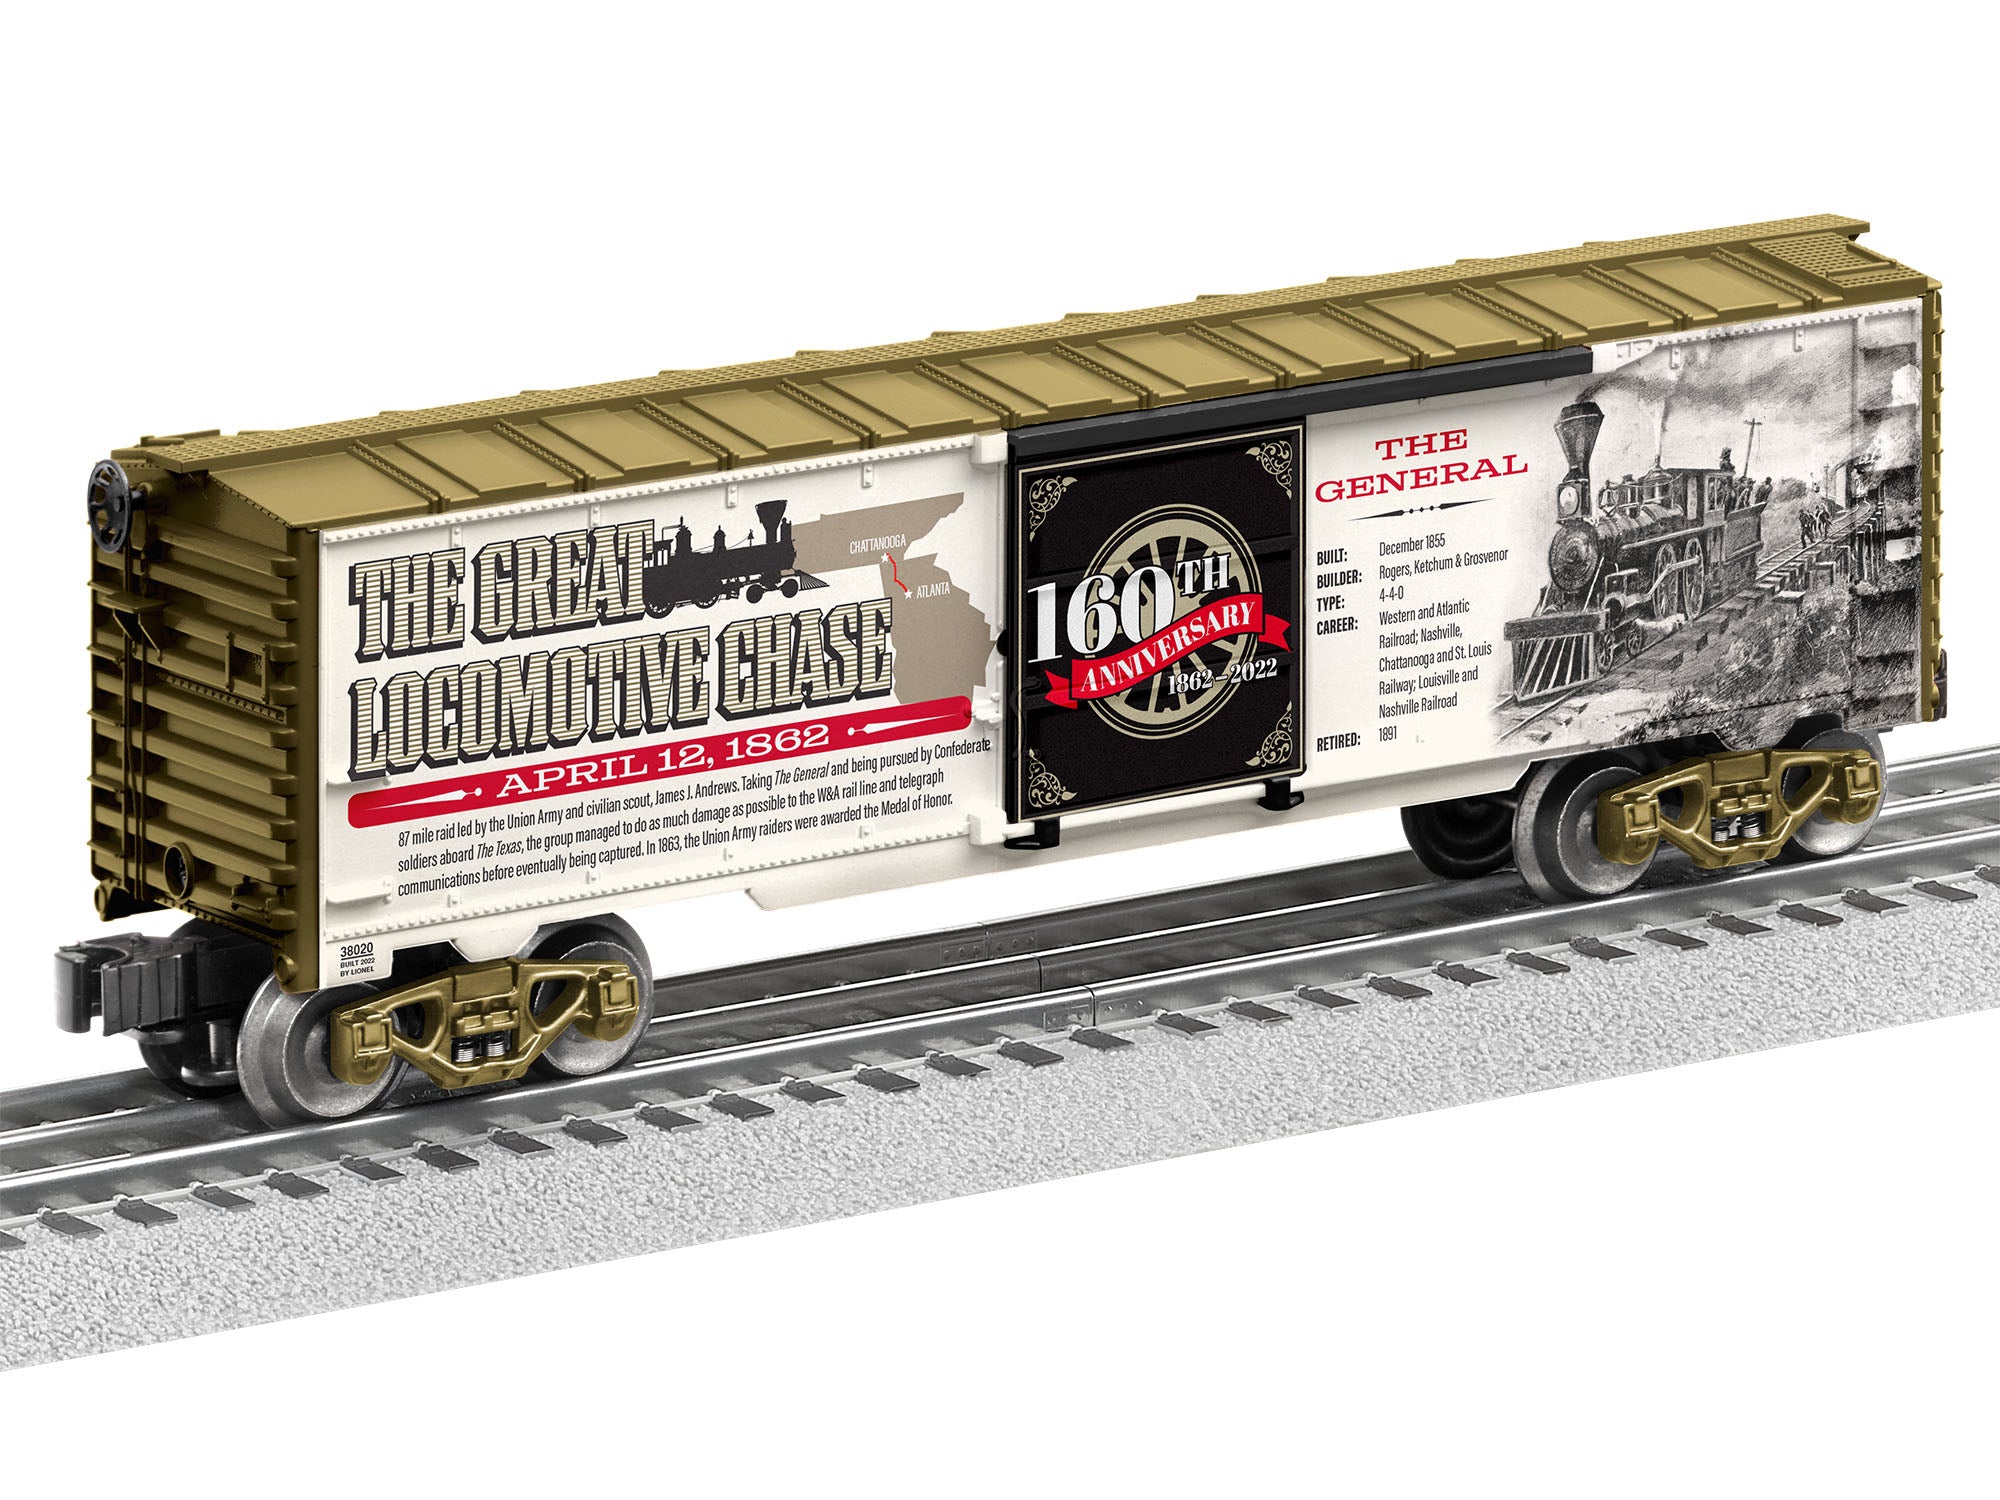 Lionel 2238020 - 160th Anniversary Boxcar "The Great Locomotive Chase"